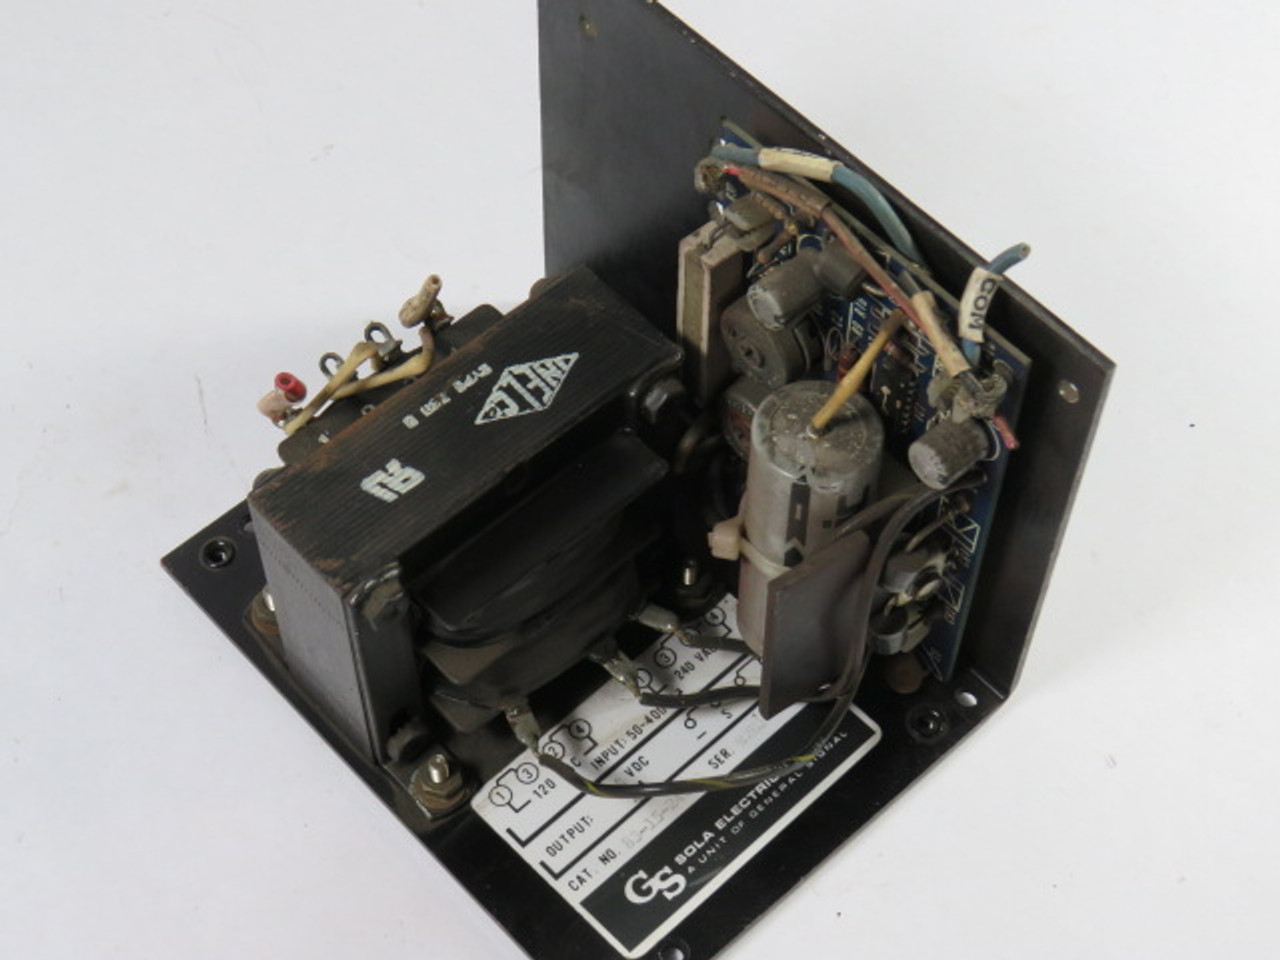 Sola Electric 83-15-240-2 Power Supply Series 82E142FP 4A 120/240VAC USED